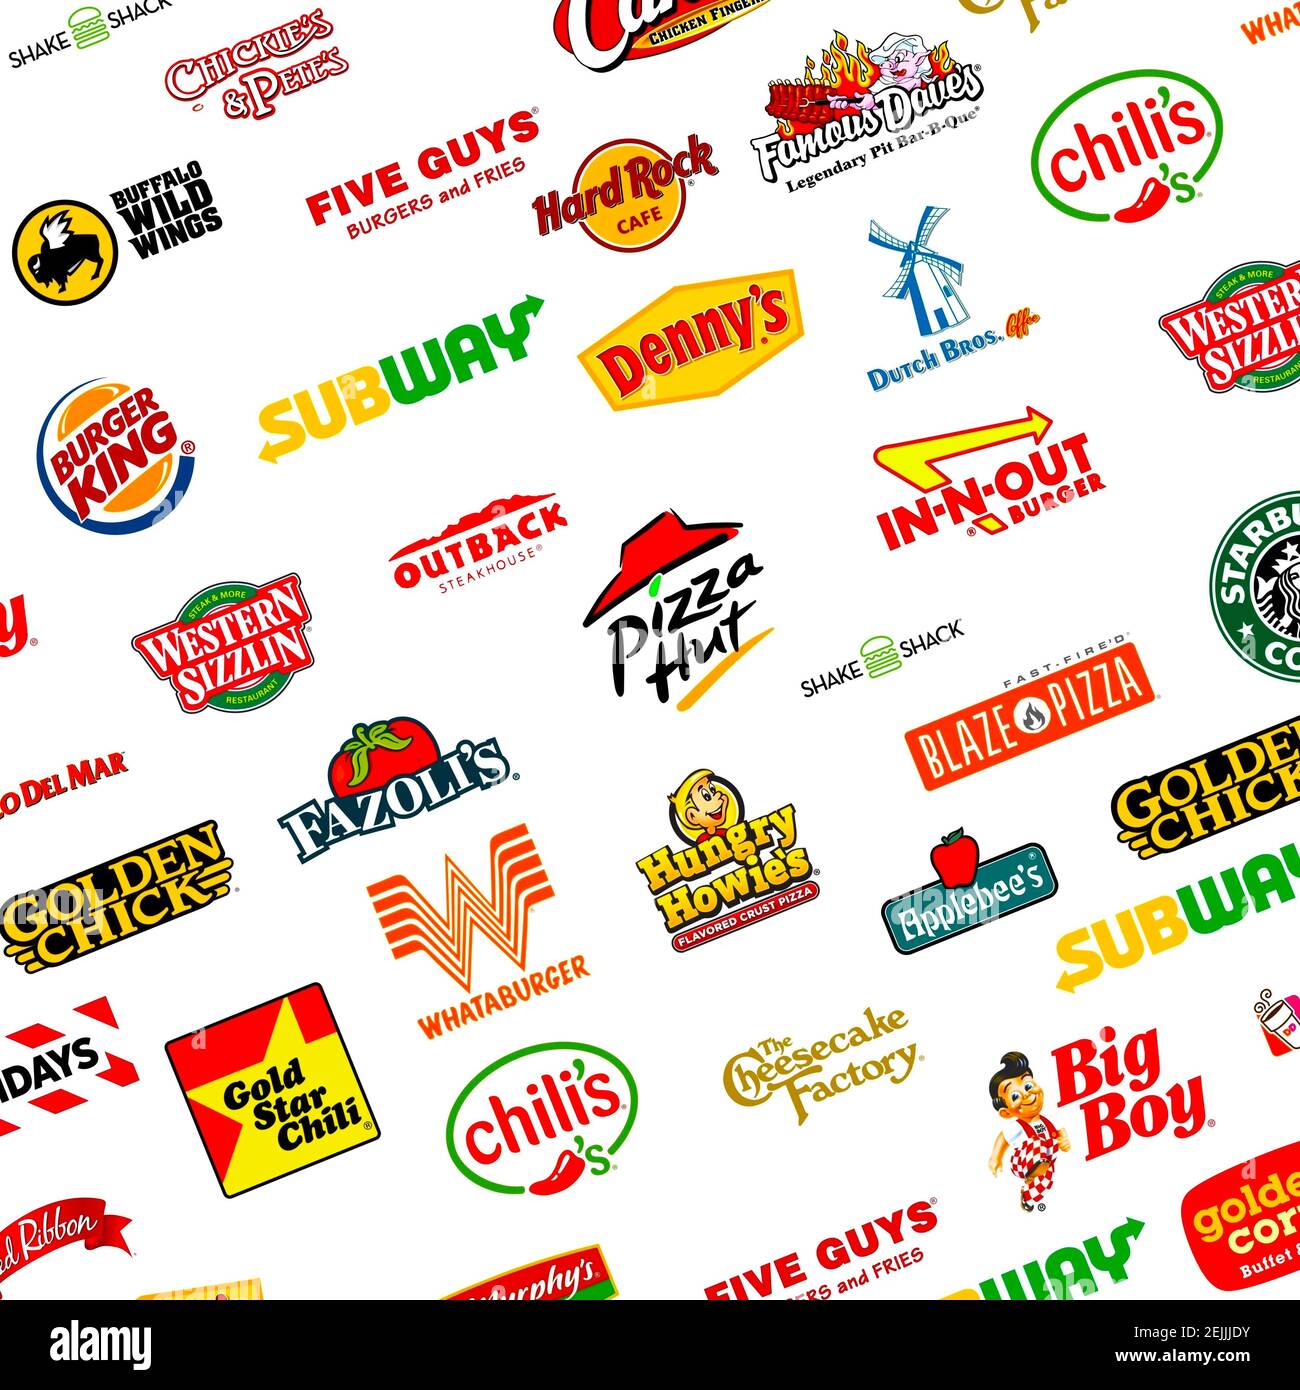 Logotype Collection Of Most Famous Fast Food Restaurants And Coffee